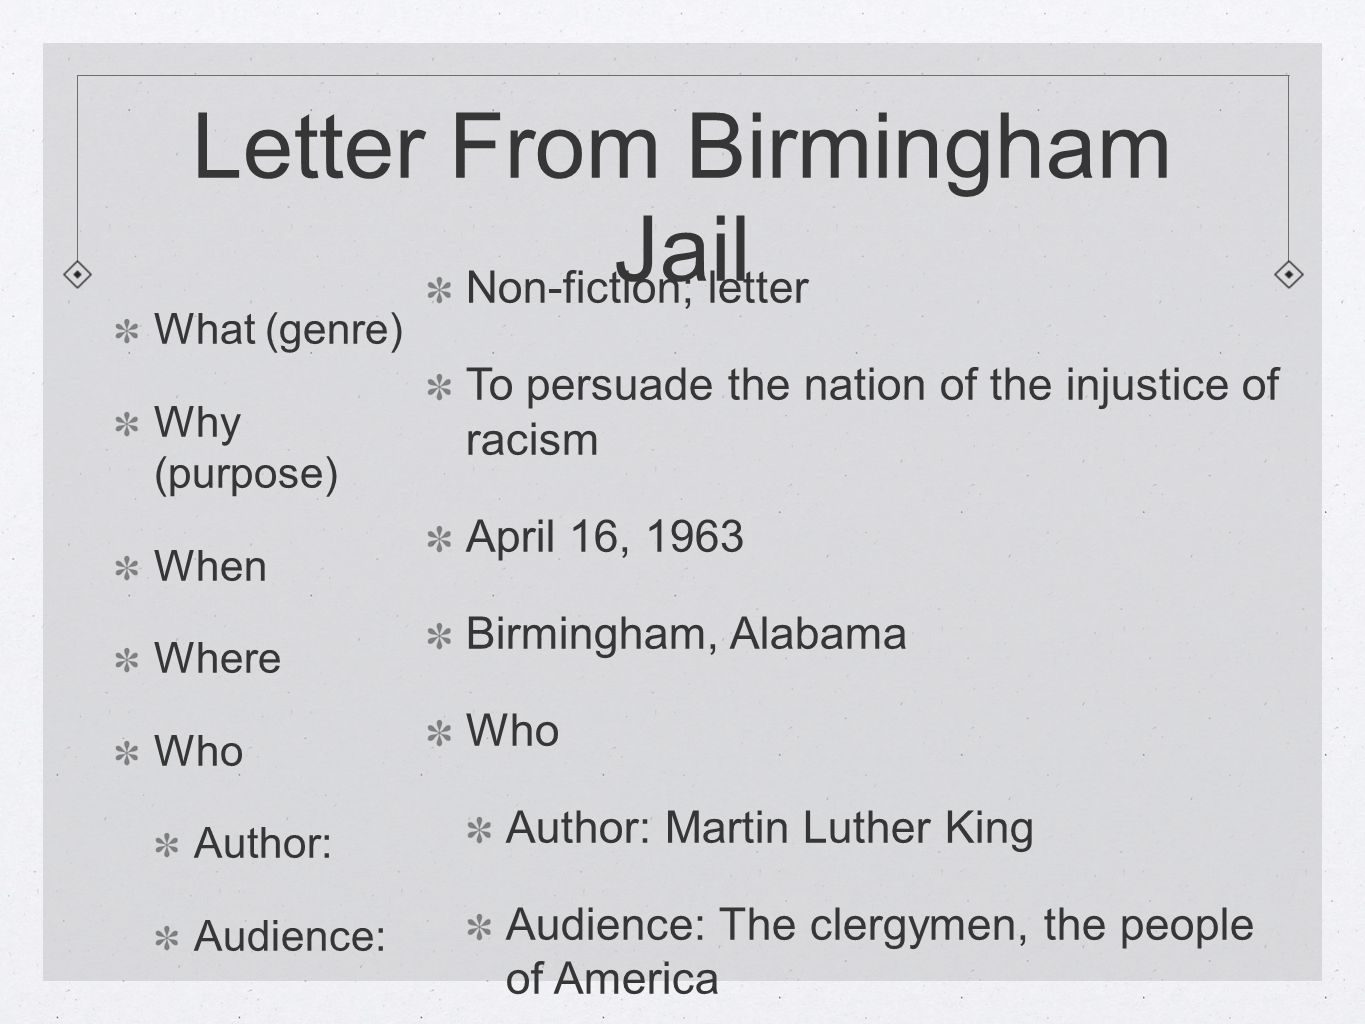 Letter From Birmingham Jail What (genre) Why (purpose) When Where Who Author: Audience: Non-fiction; letter To persuade the nation of the injustice of racism April 16, 1963 Birmingham, Alabama Who Author: Martin Luther King Audience: The clergymen, the people of America